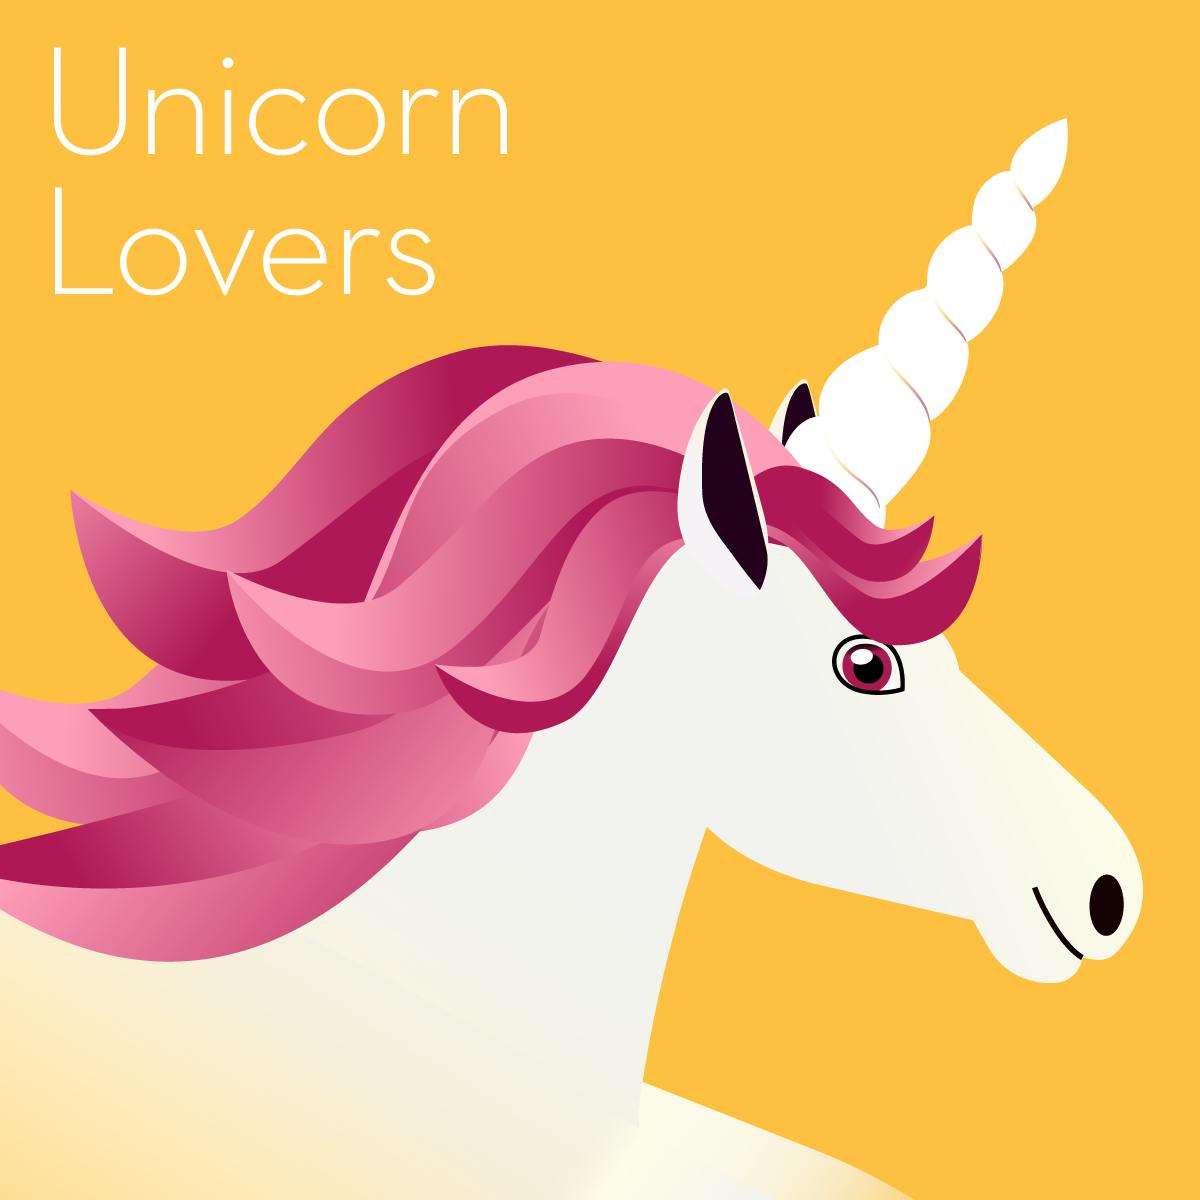 Illustration of a gift guide containing unicorn toys. Shows a white unicorn with a pink mane on an orange background.